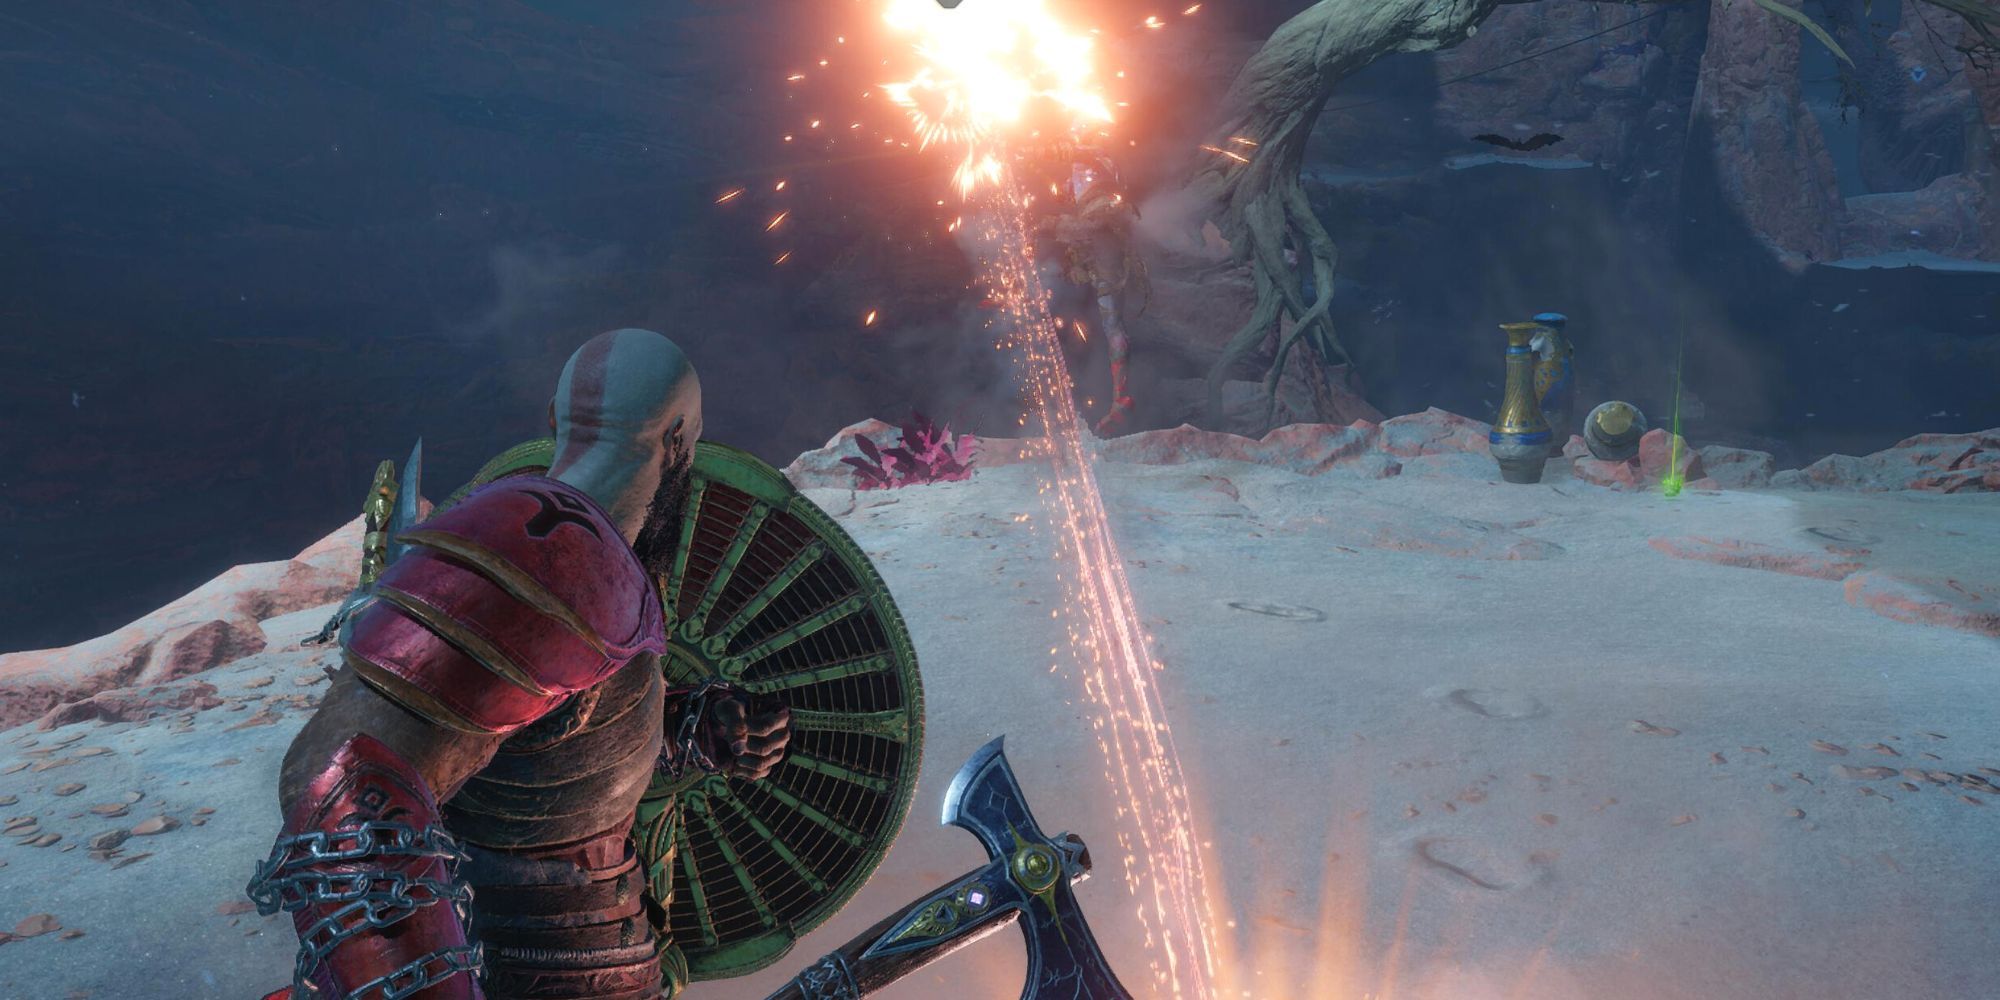 Kratos blocking an attack with a circular shield. His axe is equipped in his right hand.